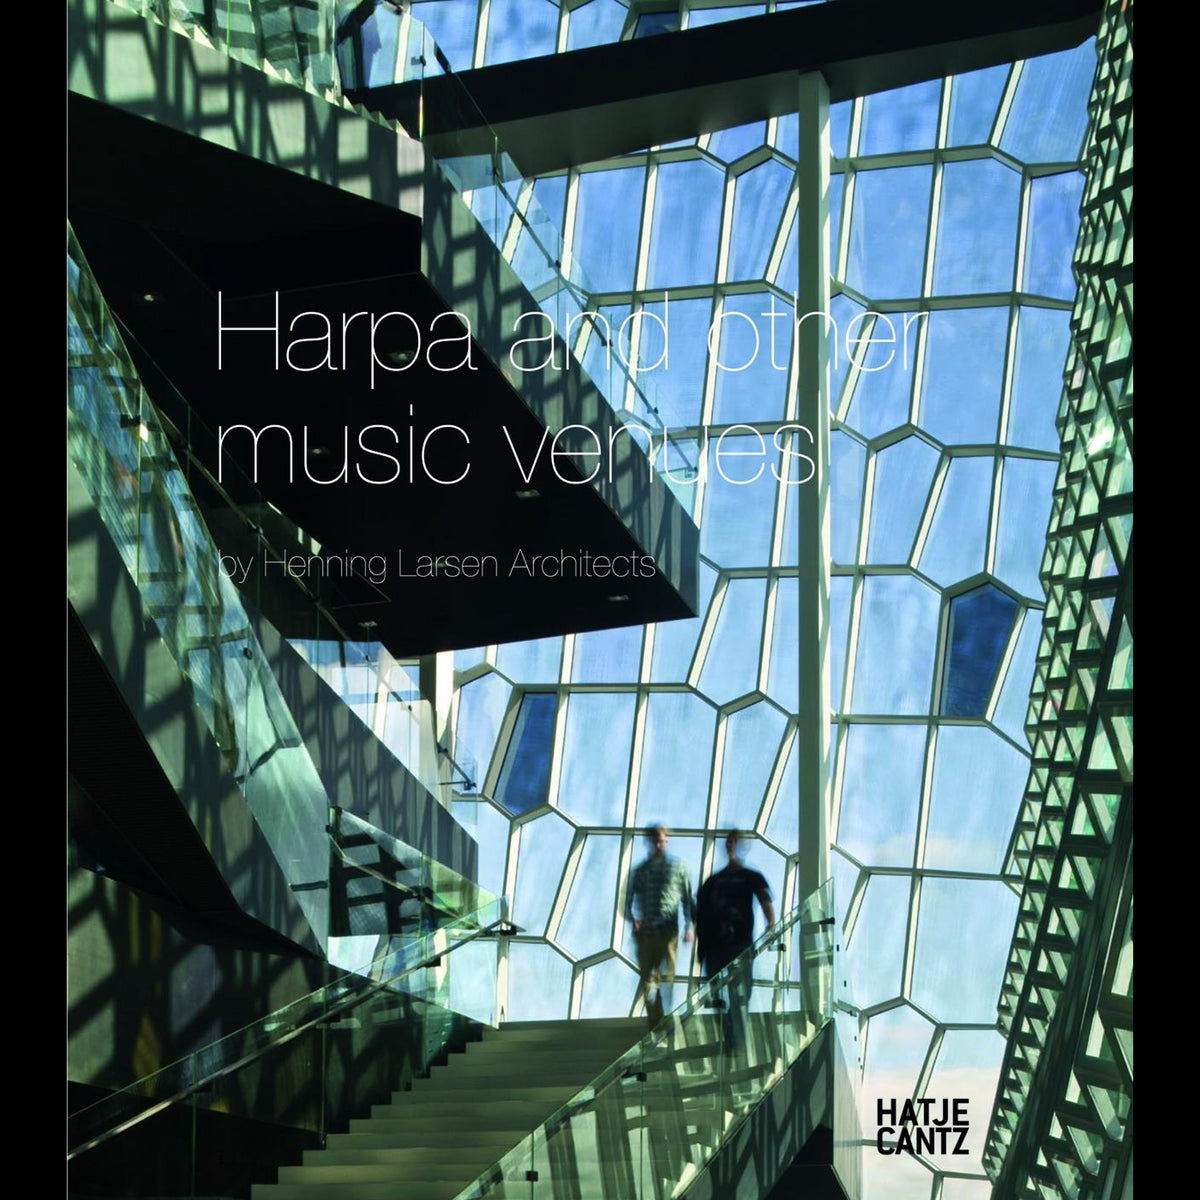 Coverbild Harpa and Other Music Venues by Henning Larsen Architects